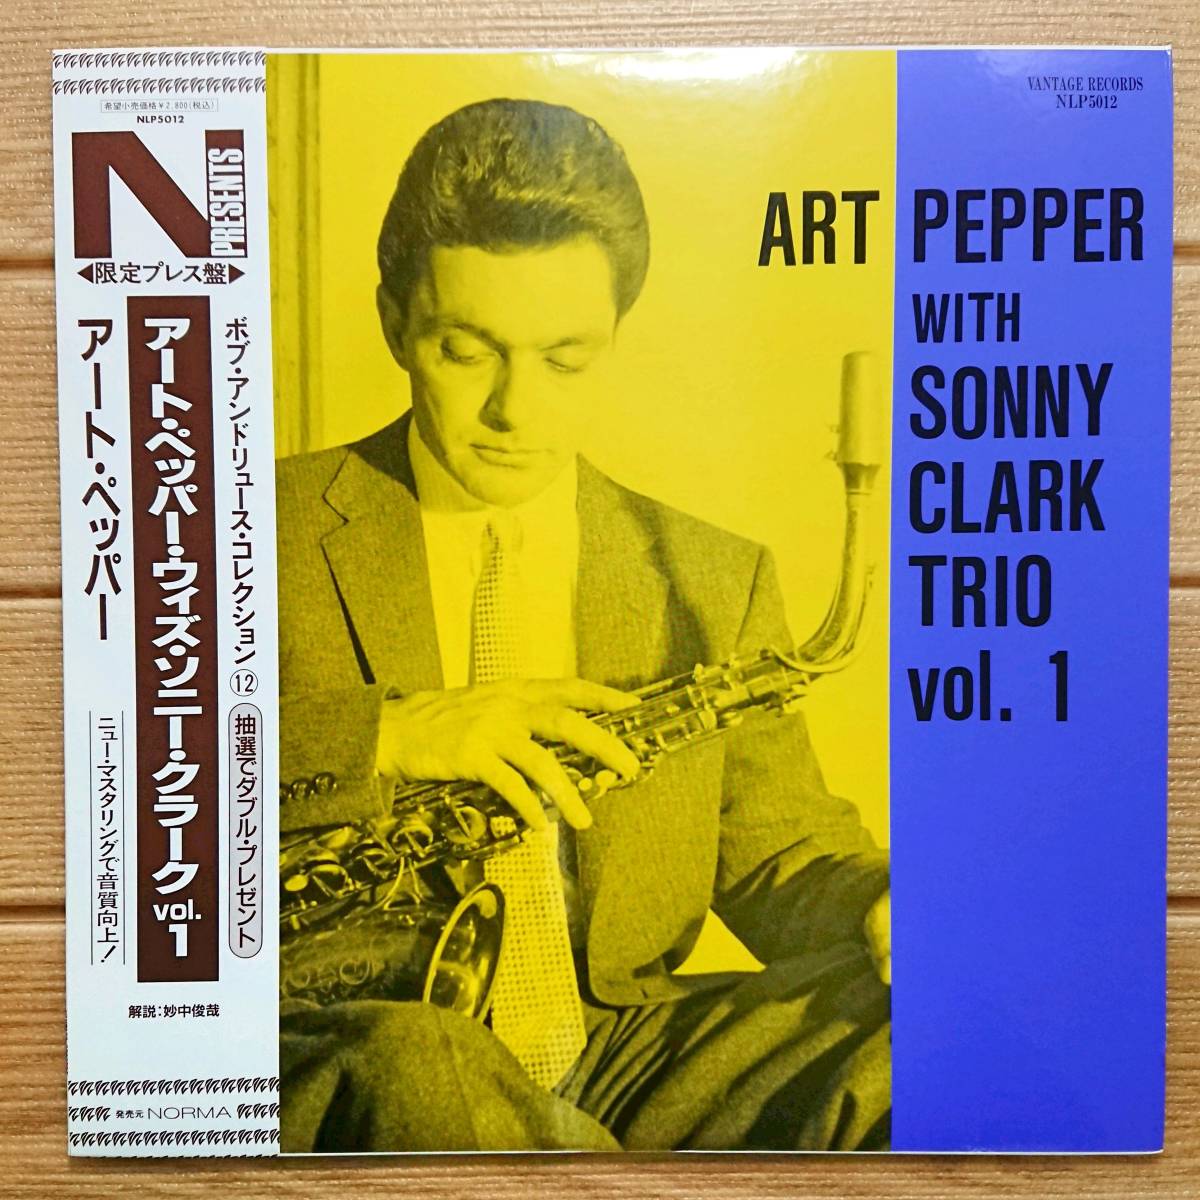 Art Pepper(as) With Sonny Clark(p) Trio Vol.1　アート・ペッパー(as)・ウィズ・ソニー・クラーク(p) Vol.1【国内帯付美盤】_画像1